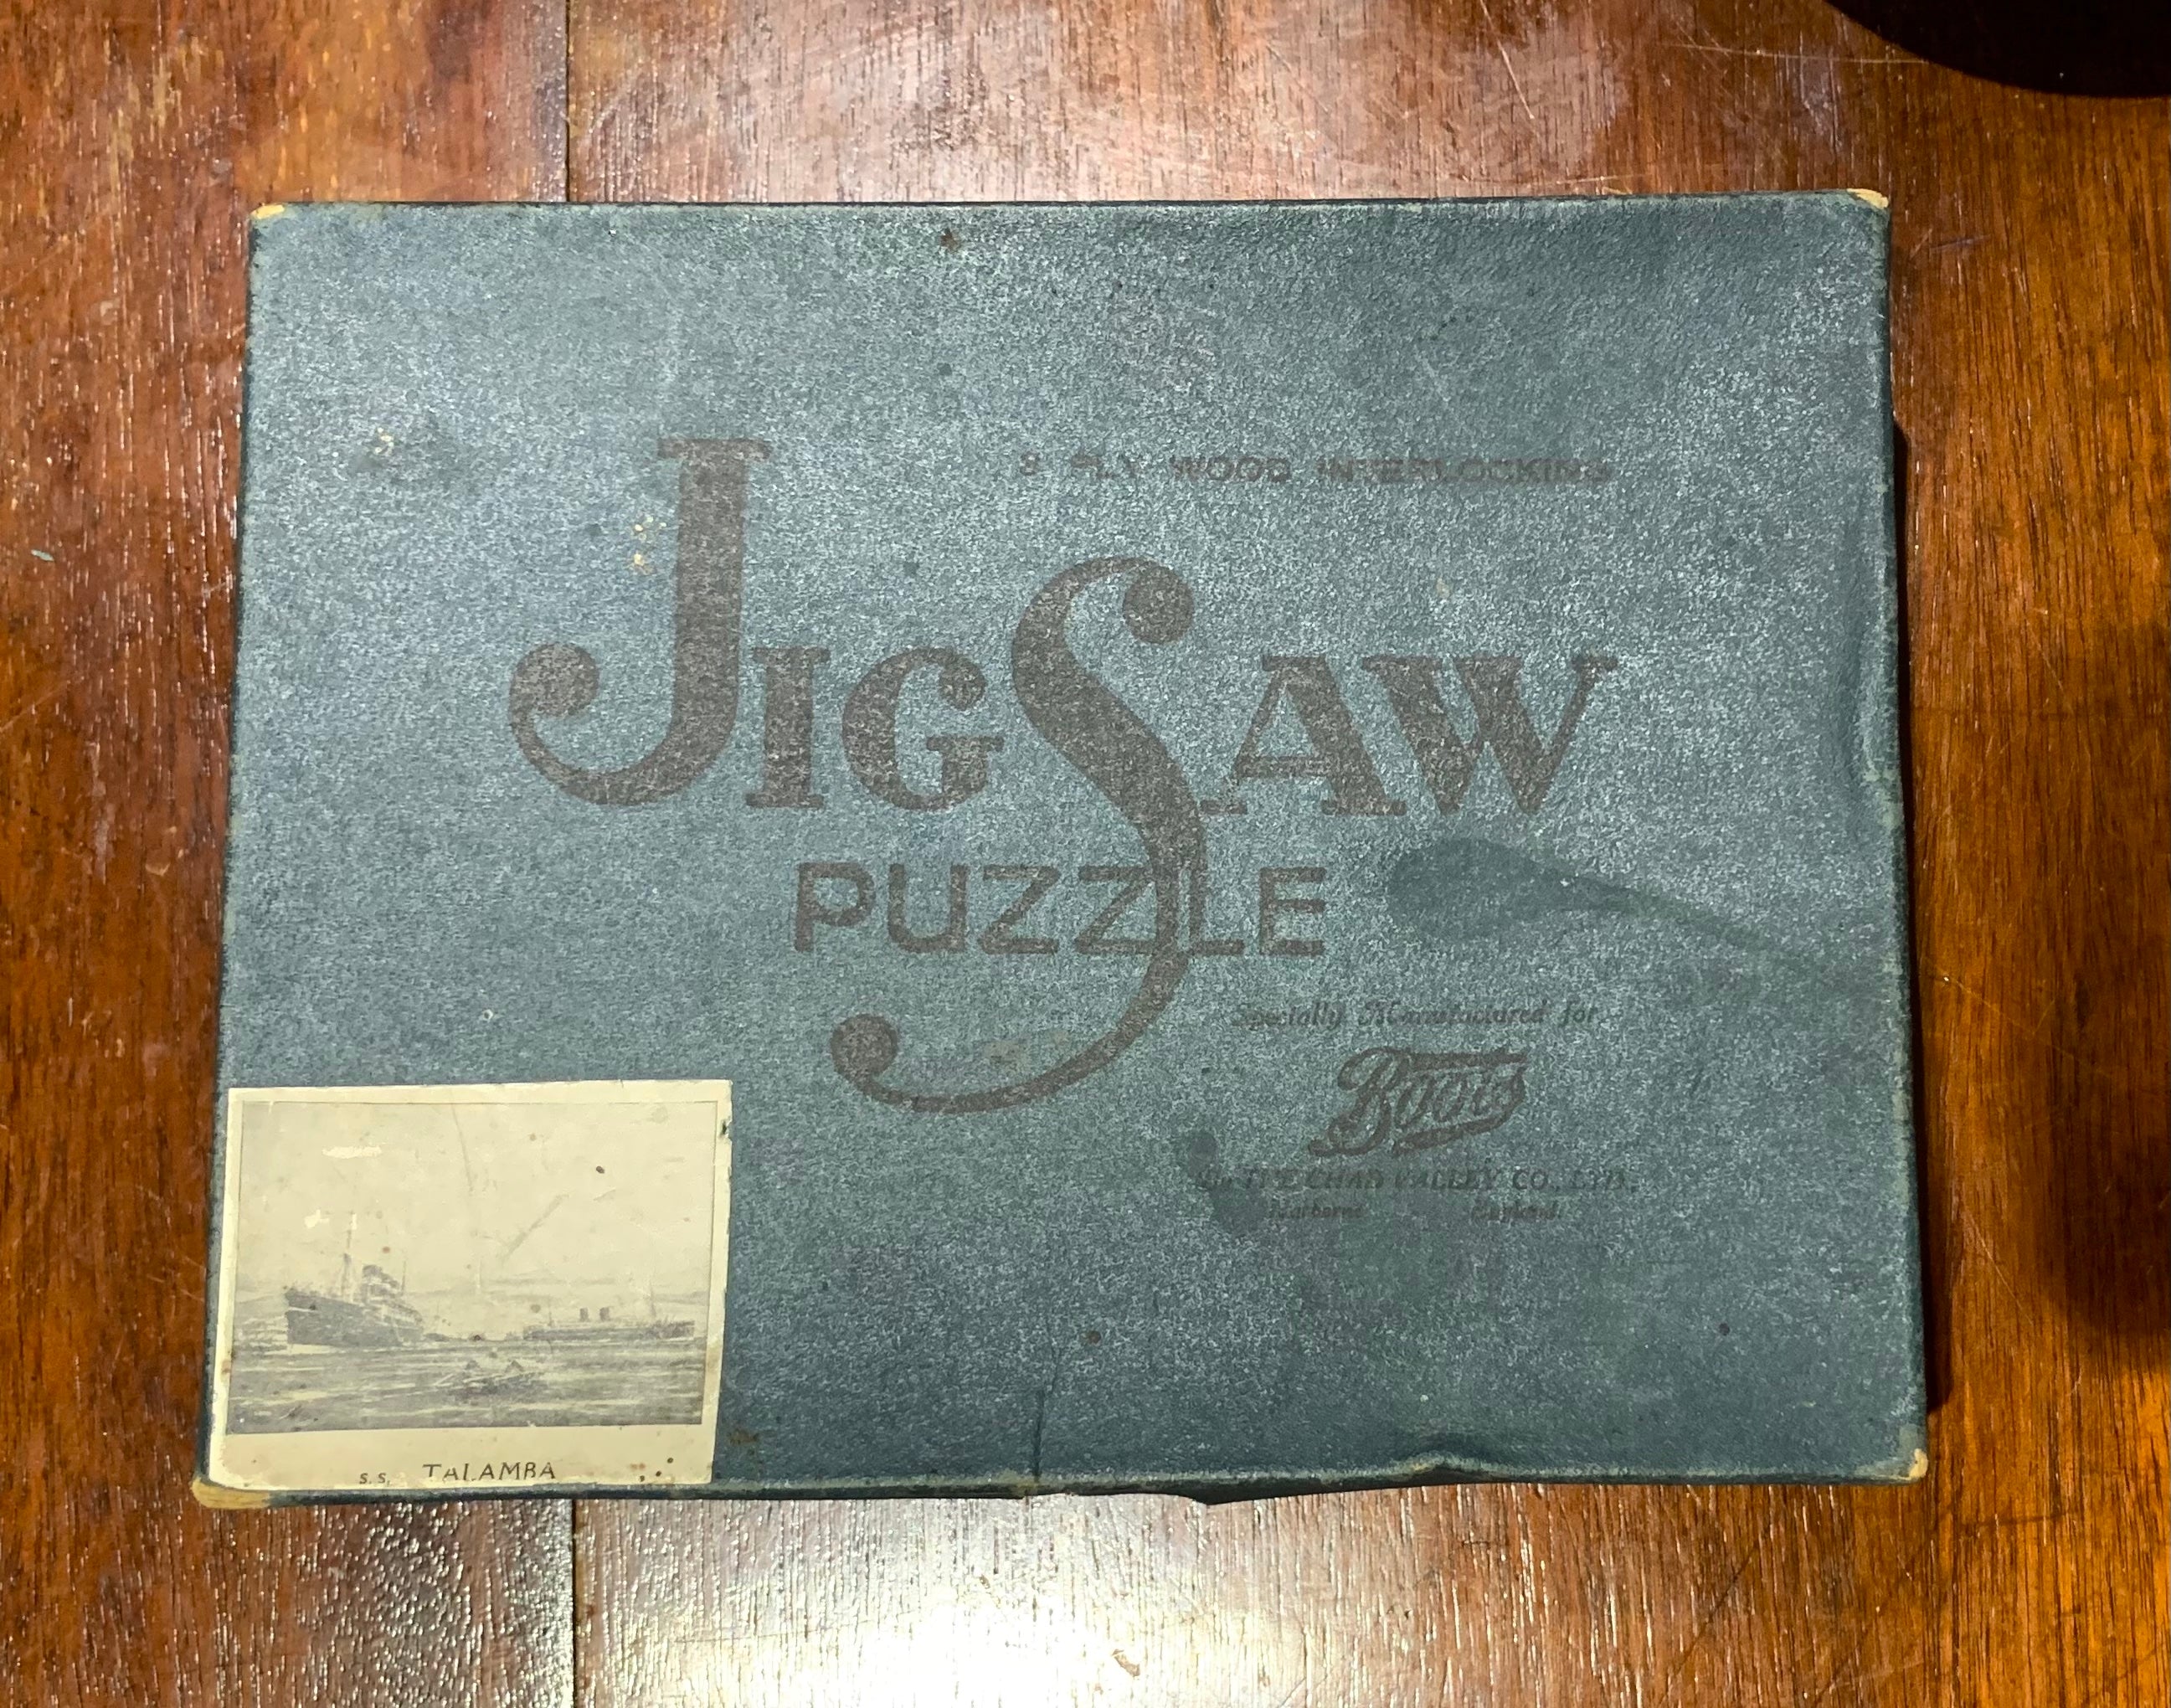 Vintage JigSaw Puzzle - 3 ply wood interlocking by Boots